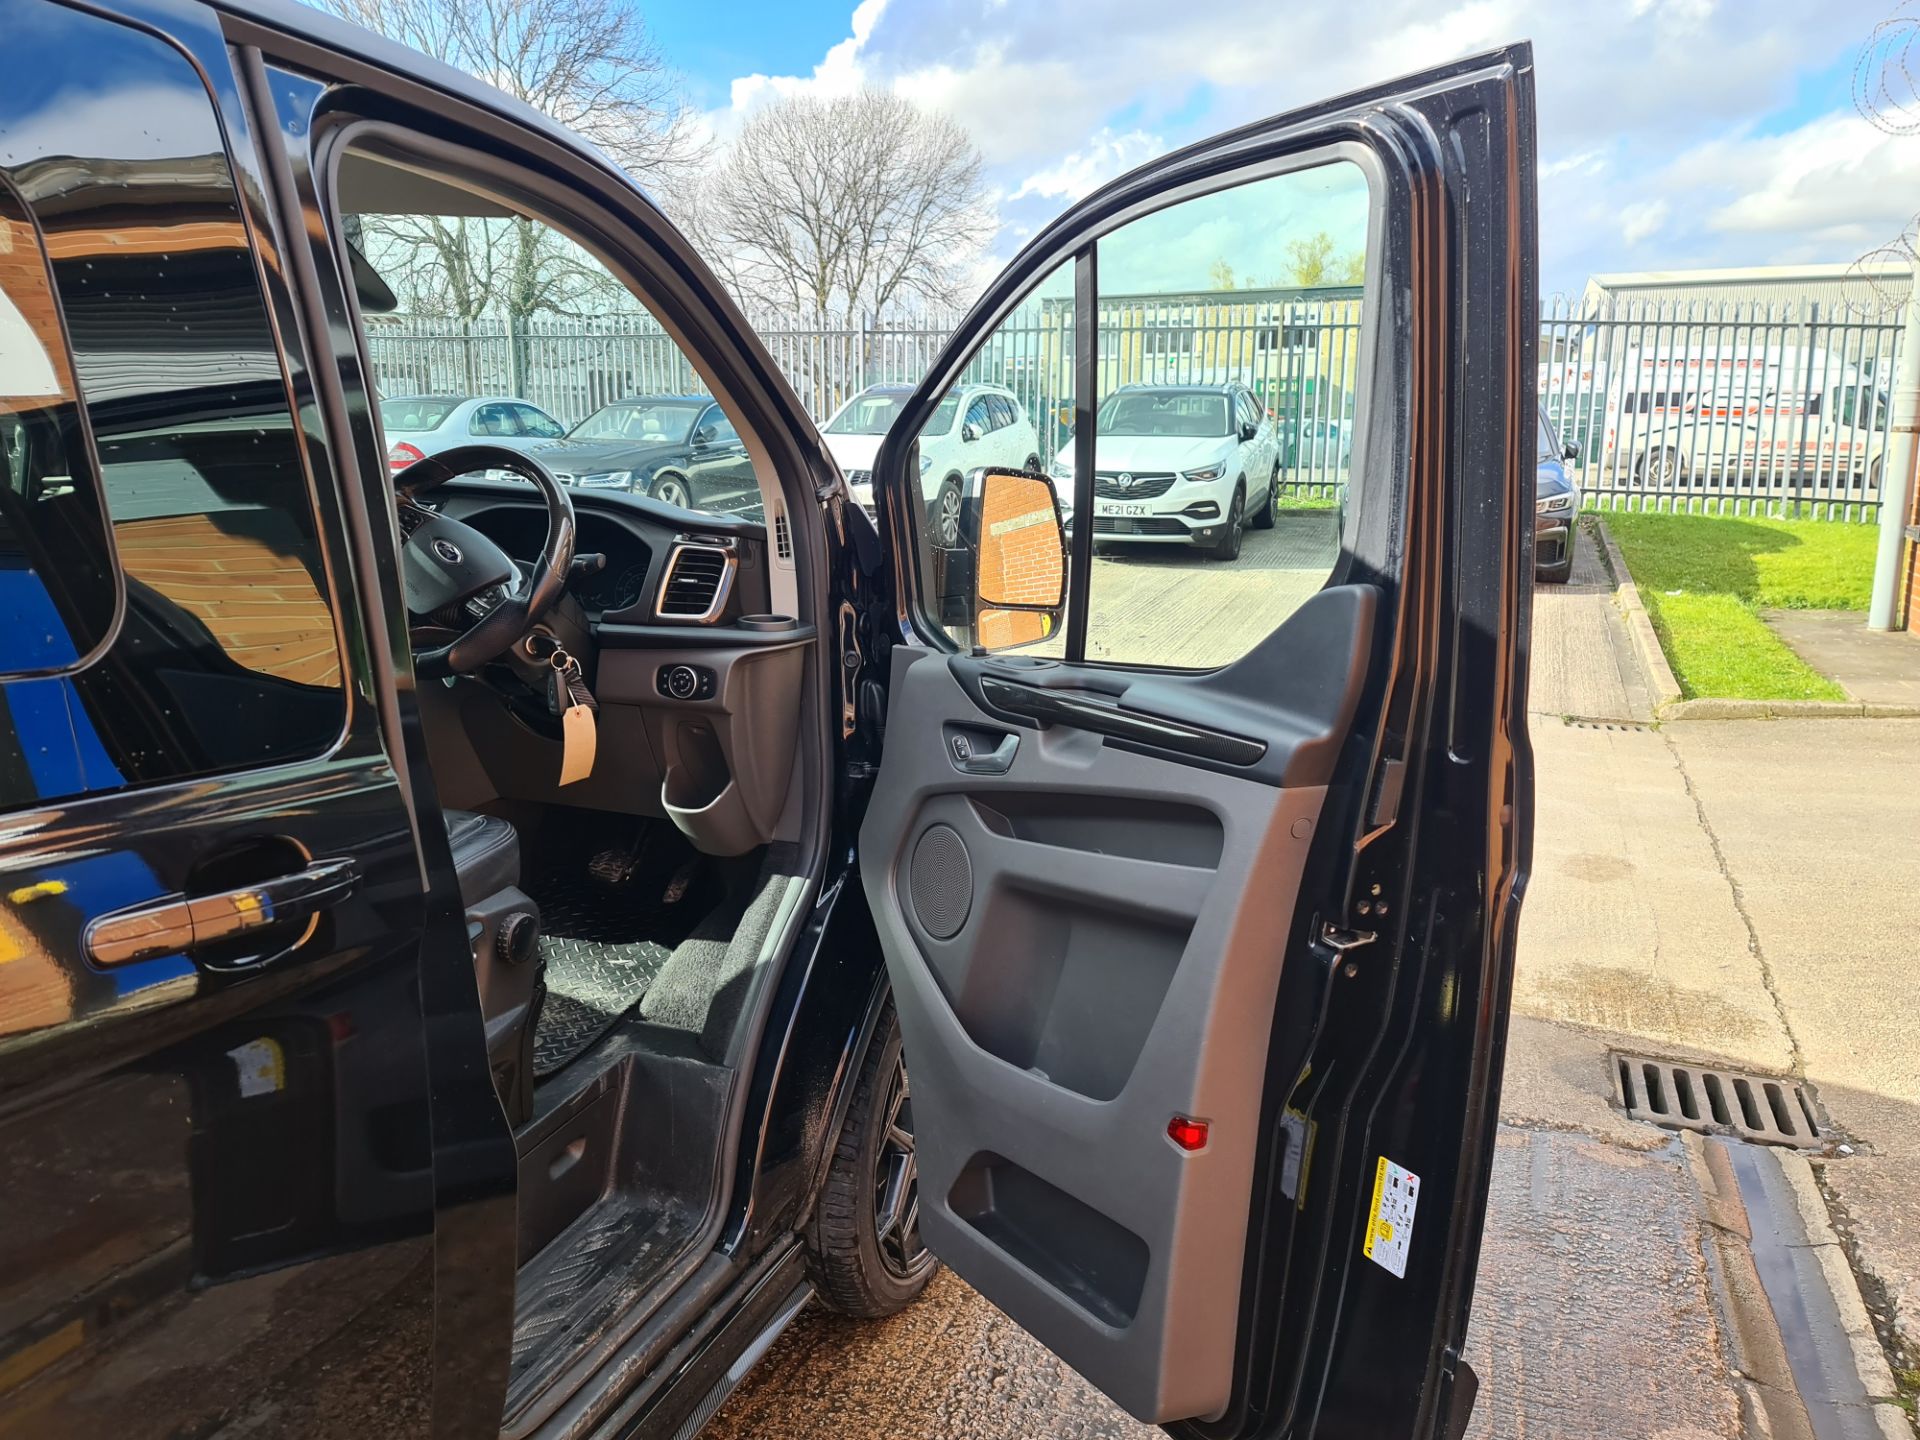 2021 Ford Transit 320LMTD Motion R panel van, auto gearbox, Ultra High Spec - Image 9 of 102